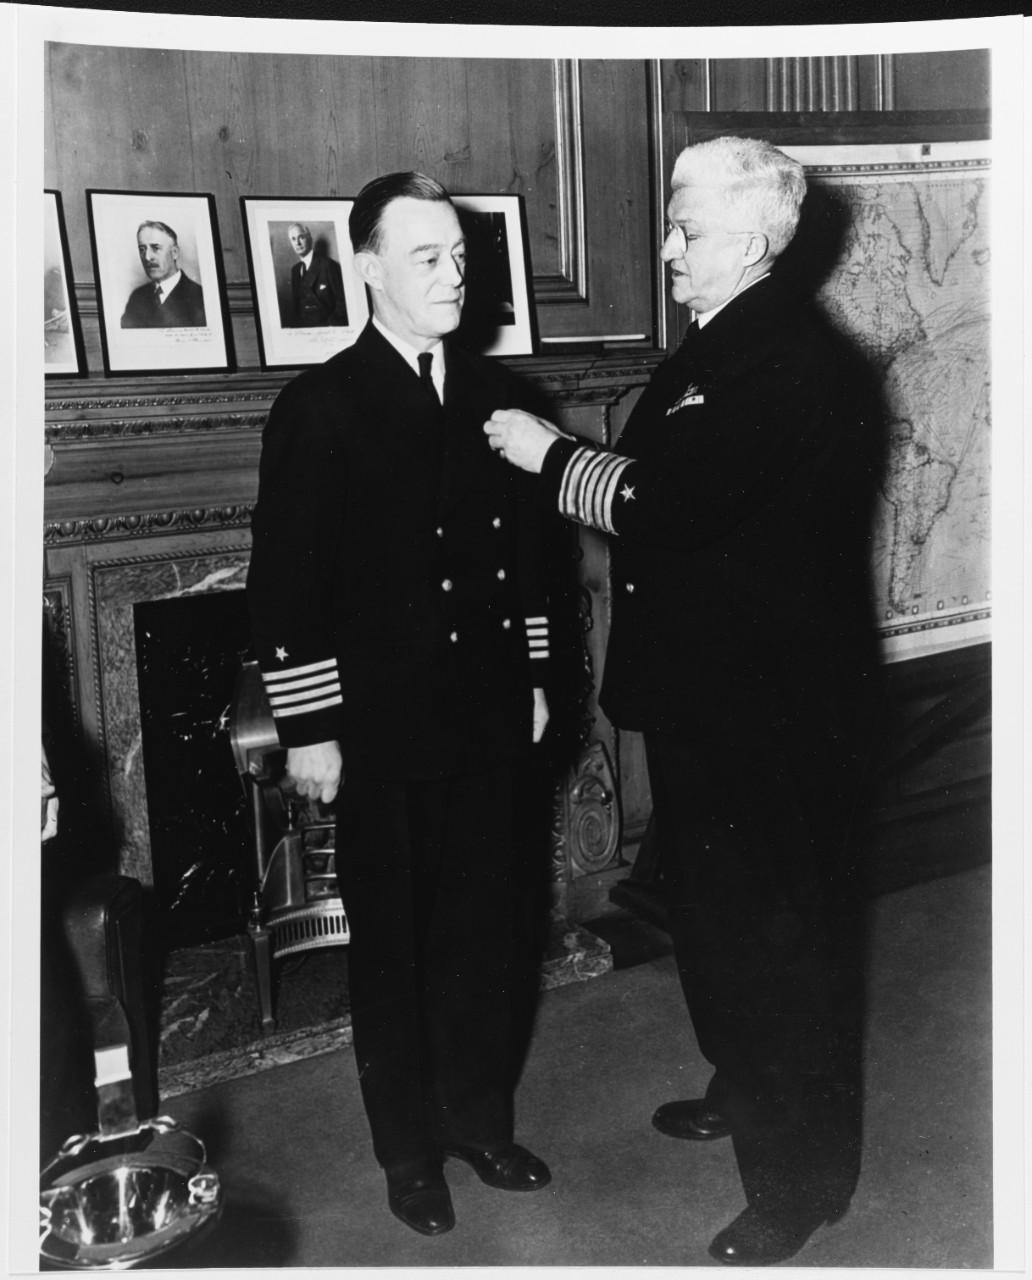 Captain Thorvald A. Solberg, USN